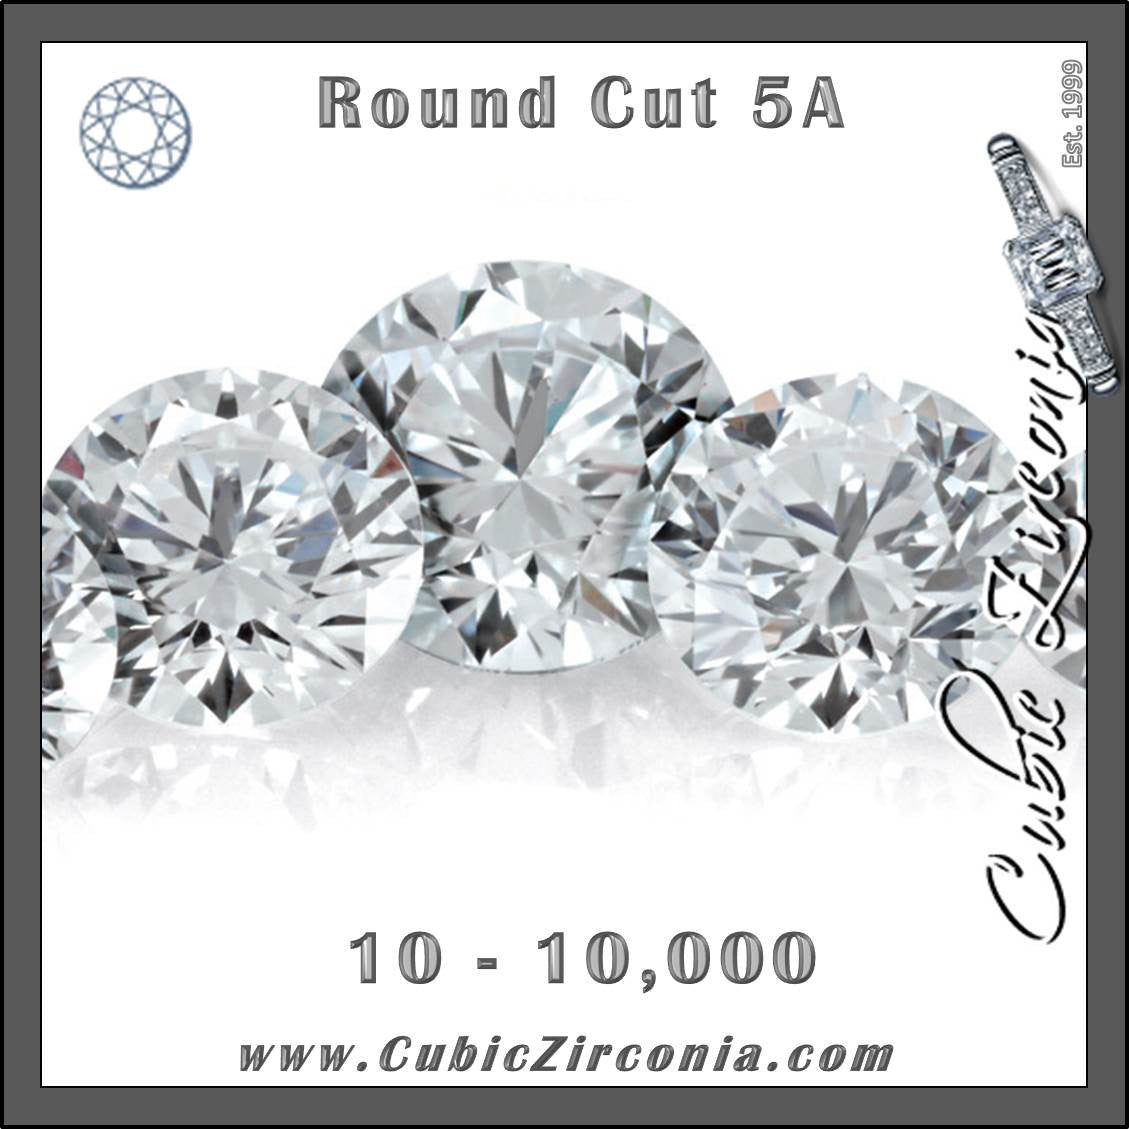 Wholesale 5A White/Clear Round Cut Melee/Accent Stones (Boutique Packages 10-10,000 units)